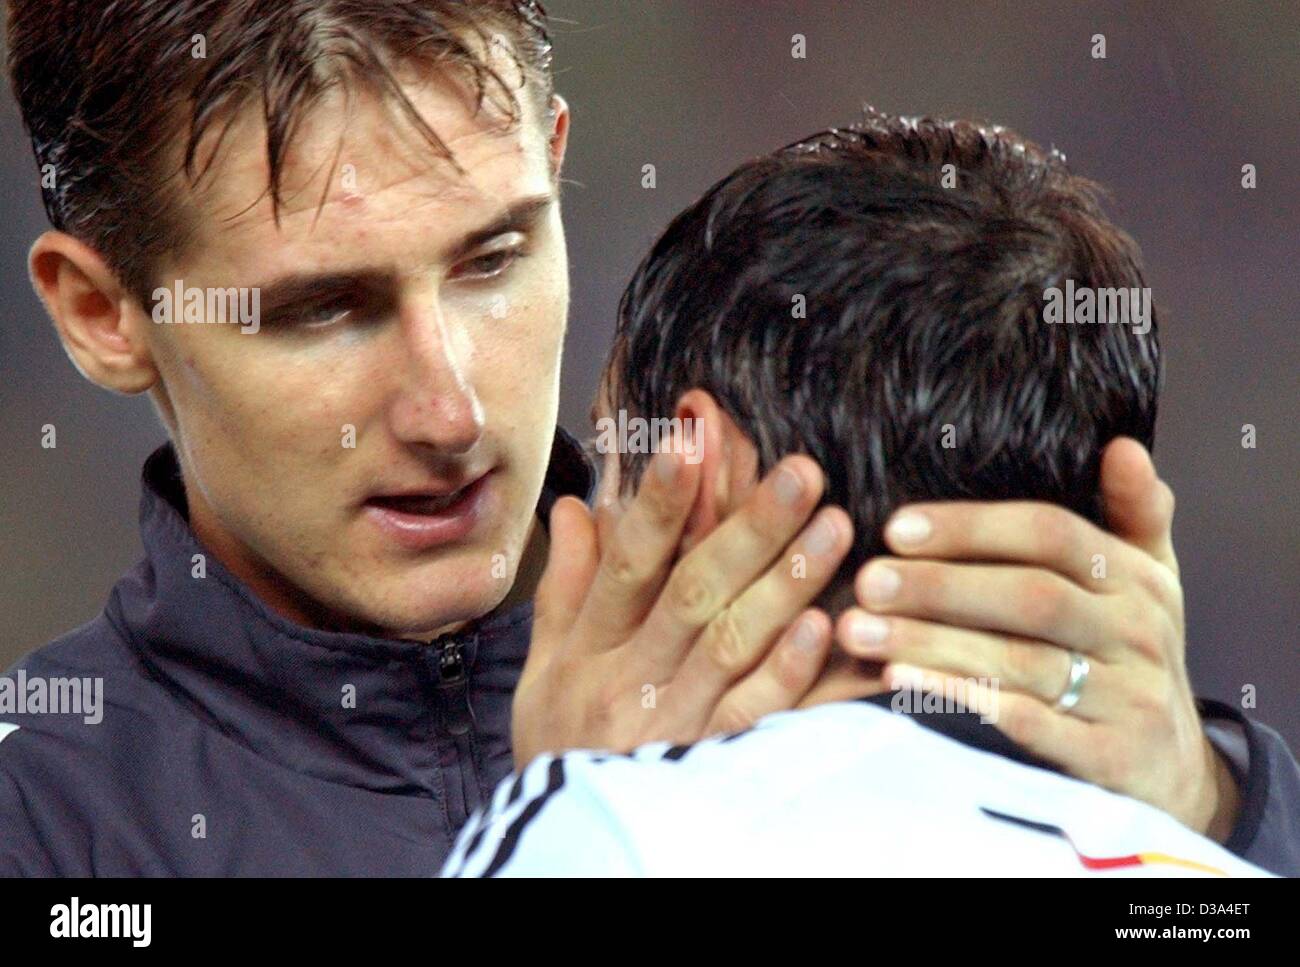 (dpa) - German striker Miroslav Klose (L) comforts his team mate Oliver Neuville after the defeat in the FIFA World Cup final opposing Germany and Brazil in Yokohama, Japan, 30 June 2002. The match ended 2:0 for Brazil, making Brazil a record five-time world champion and Germany winning the 2nd plac Stock Photo